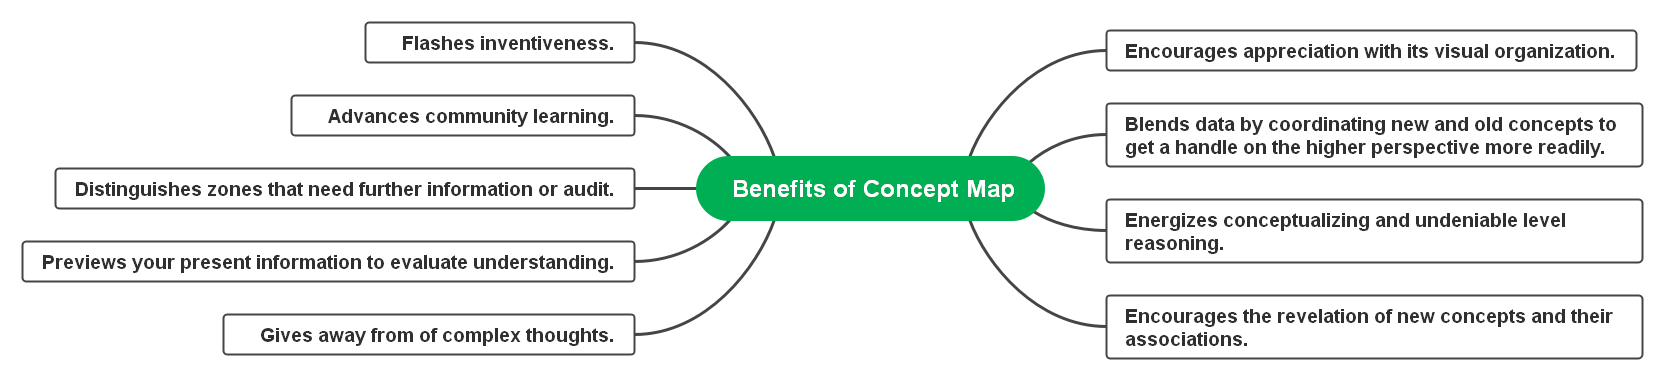 benefits of concept map